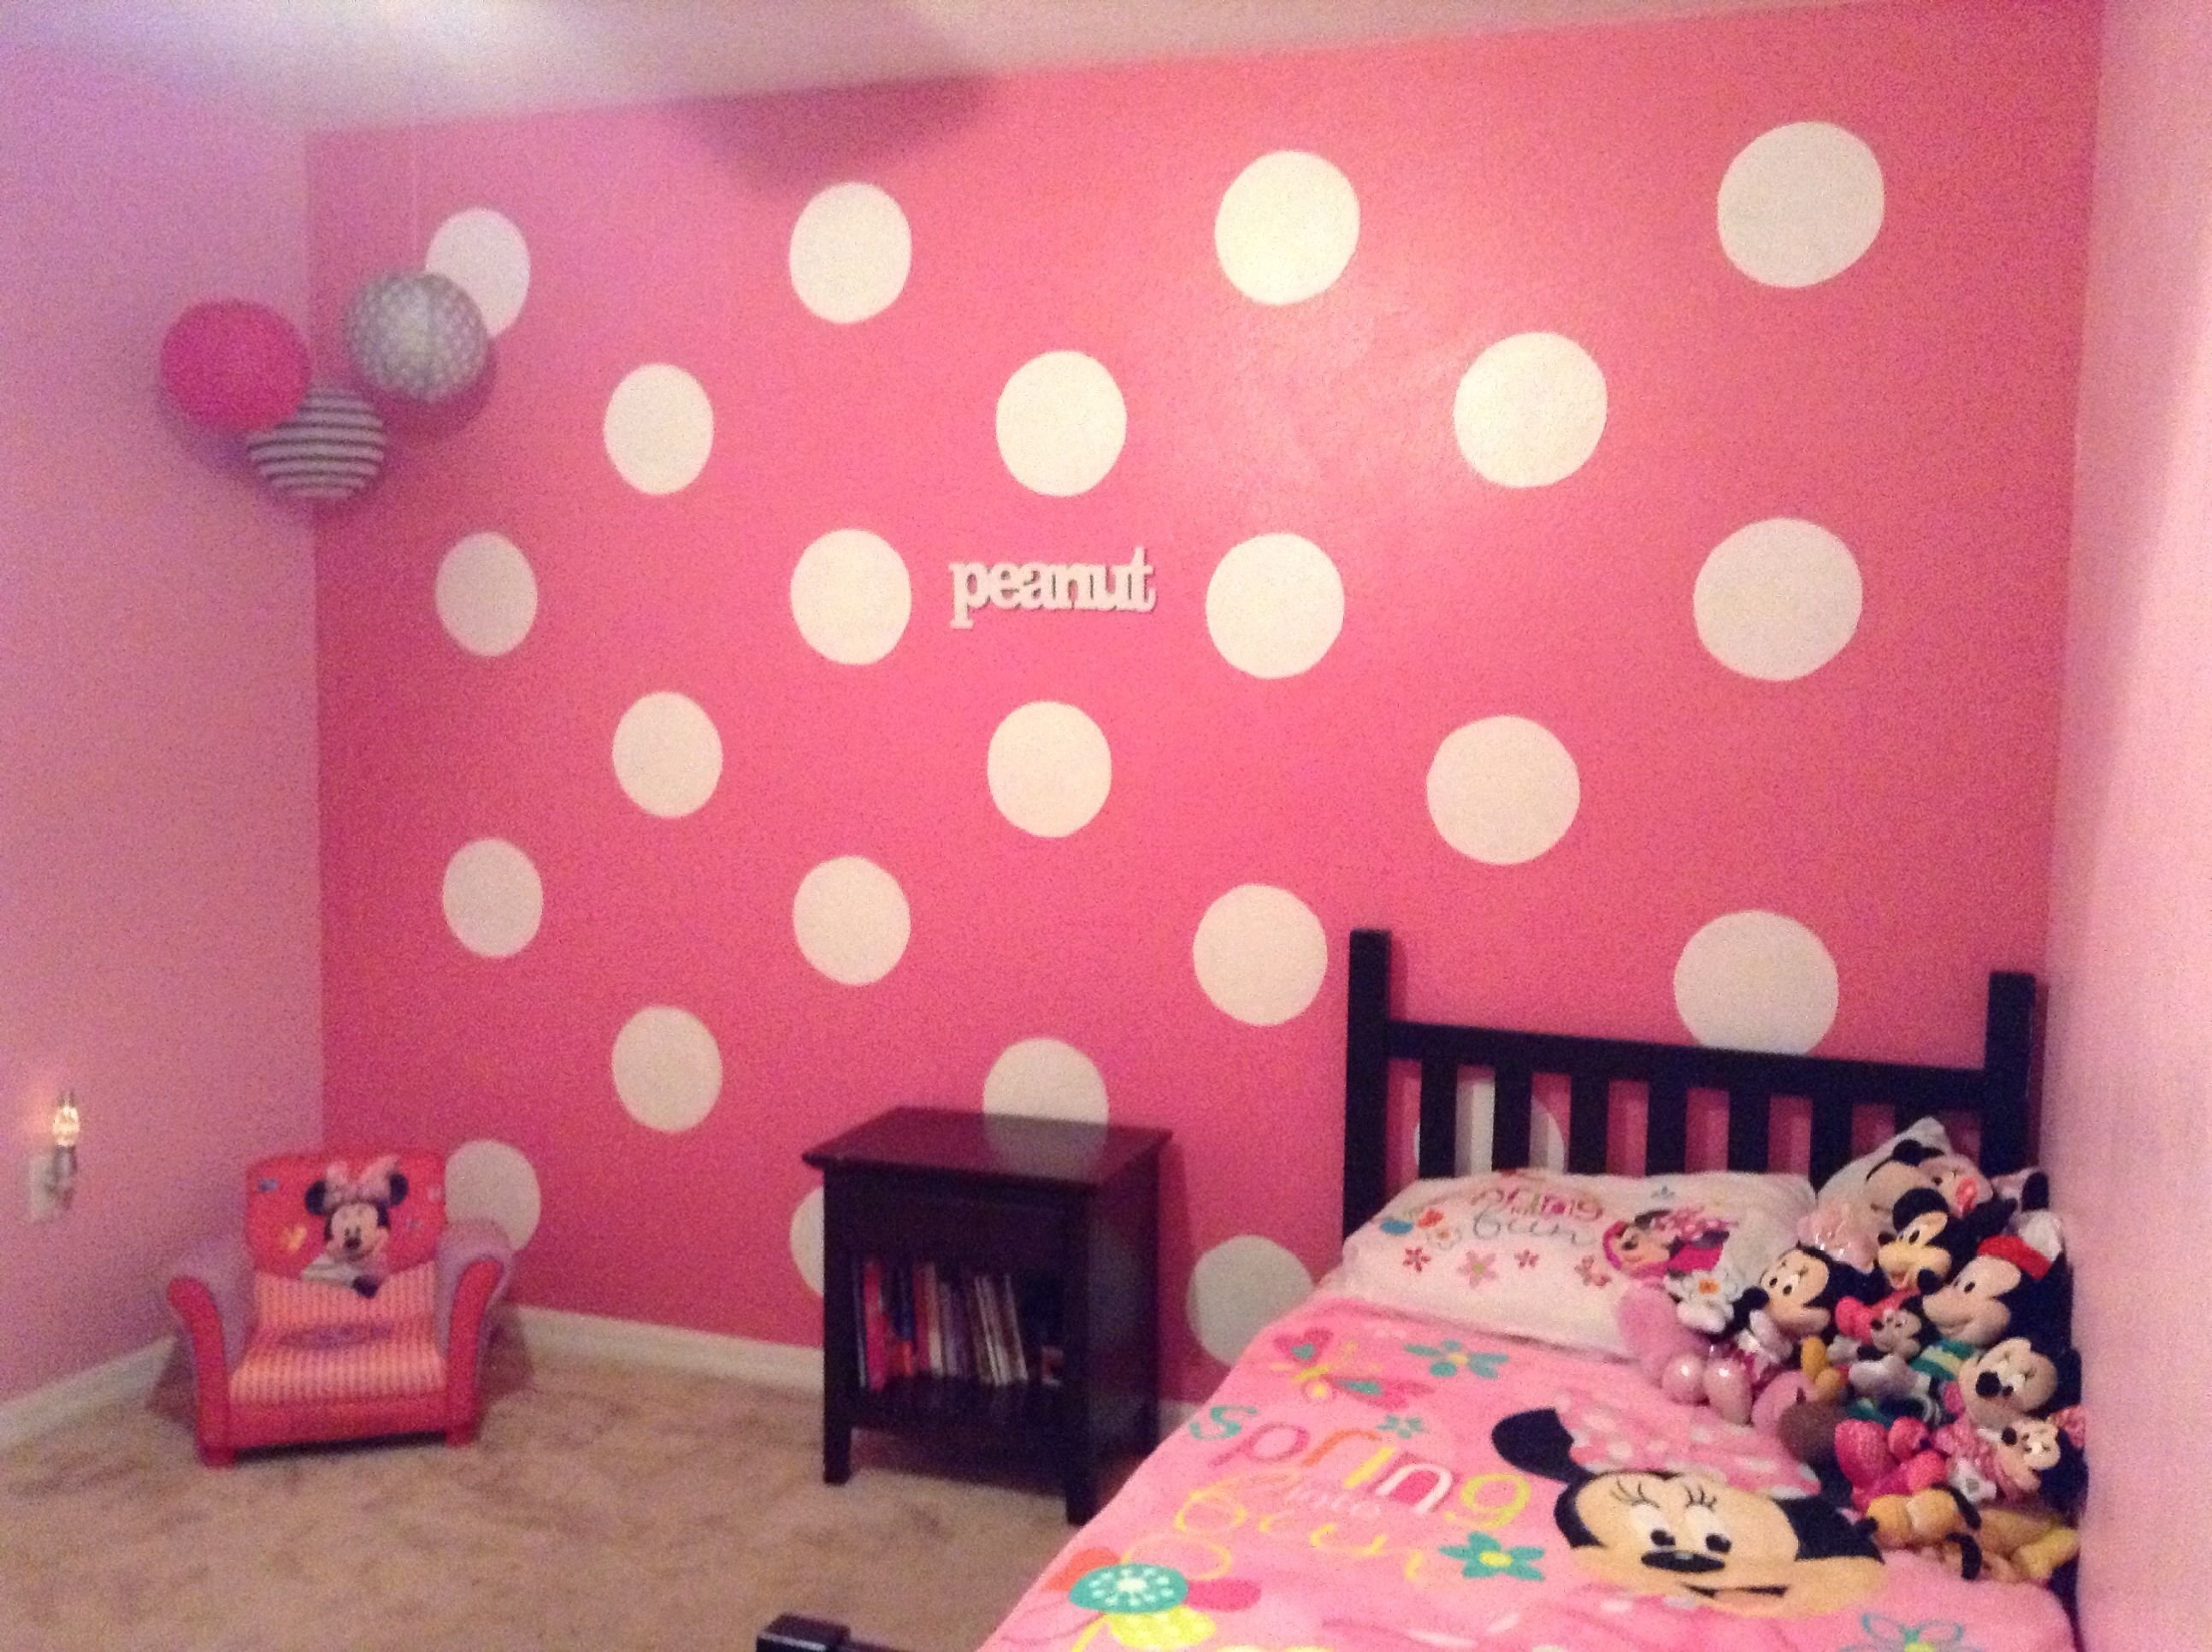 10 Great Minnie Mouse Room Decorating Ideas it could also be a really cute minnie mouse room for a little girl 2023